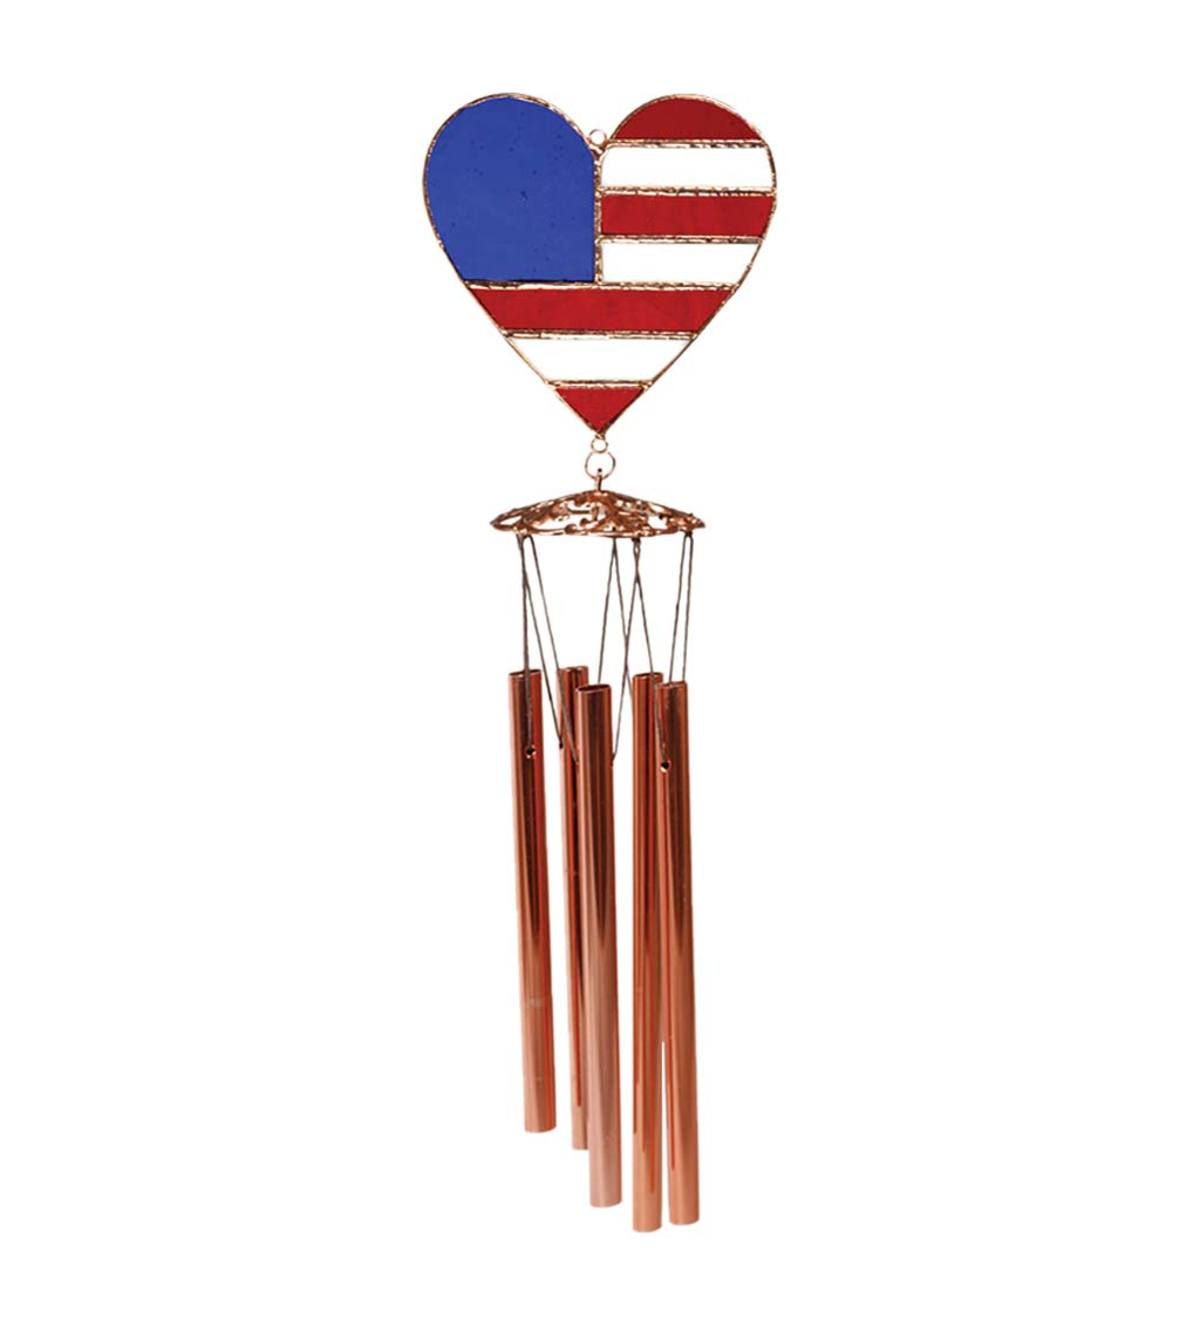 Details about   JW Stannard 28" Patriotic American Flag Hand-Tuned Wind Chime~USA~Red White Blue 